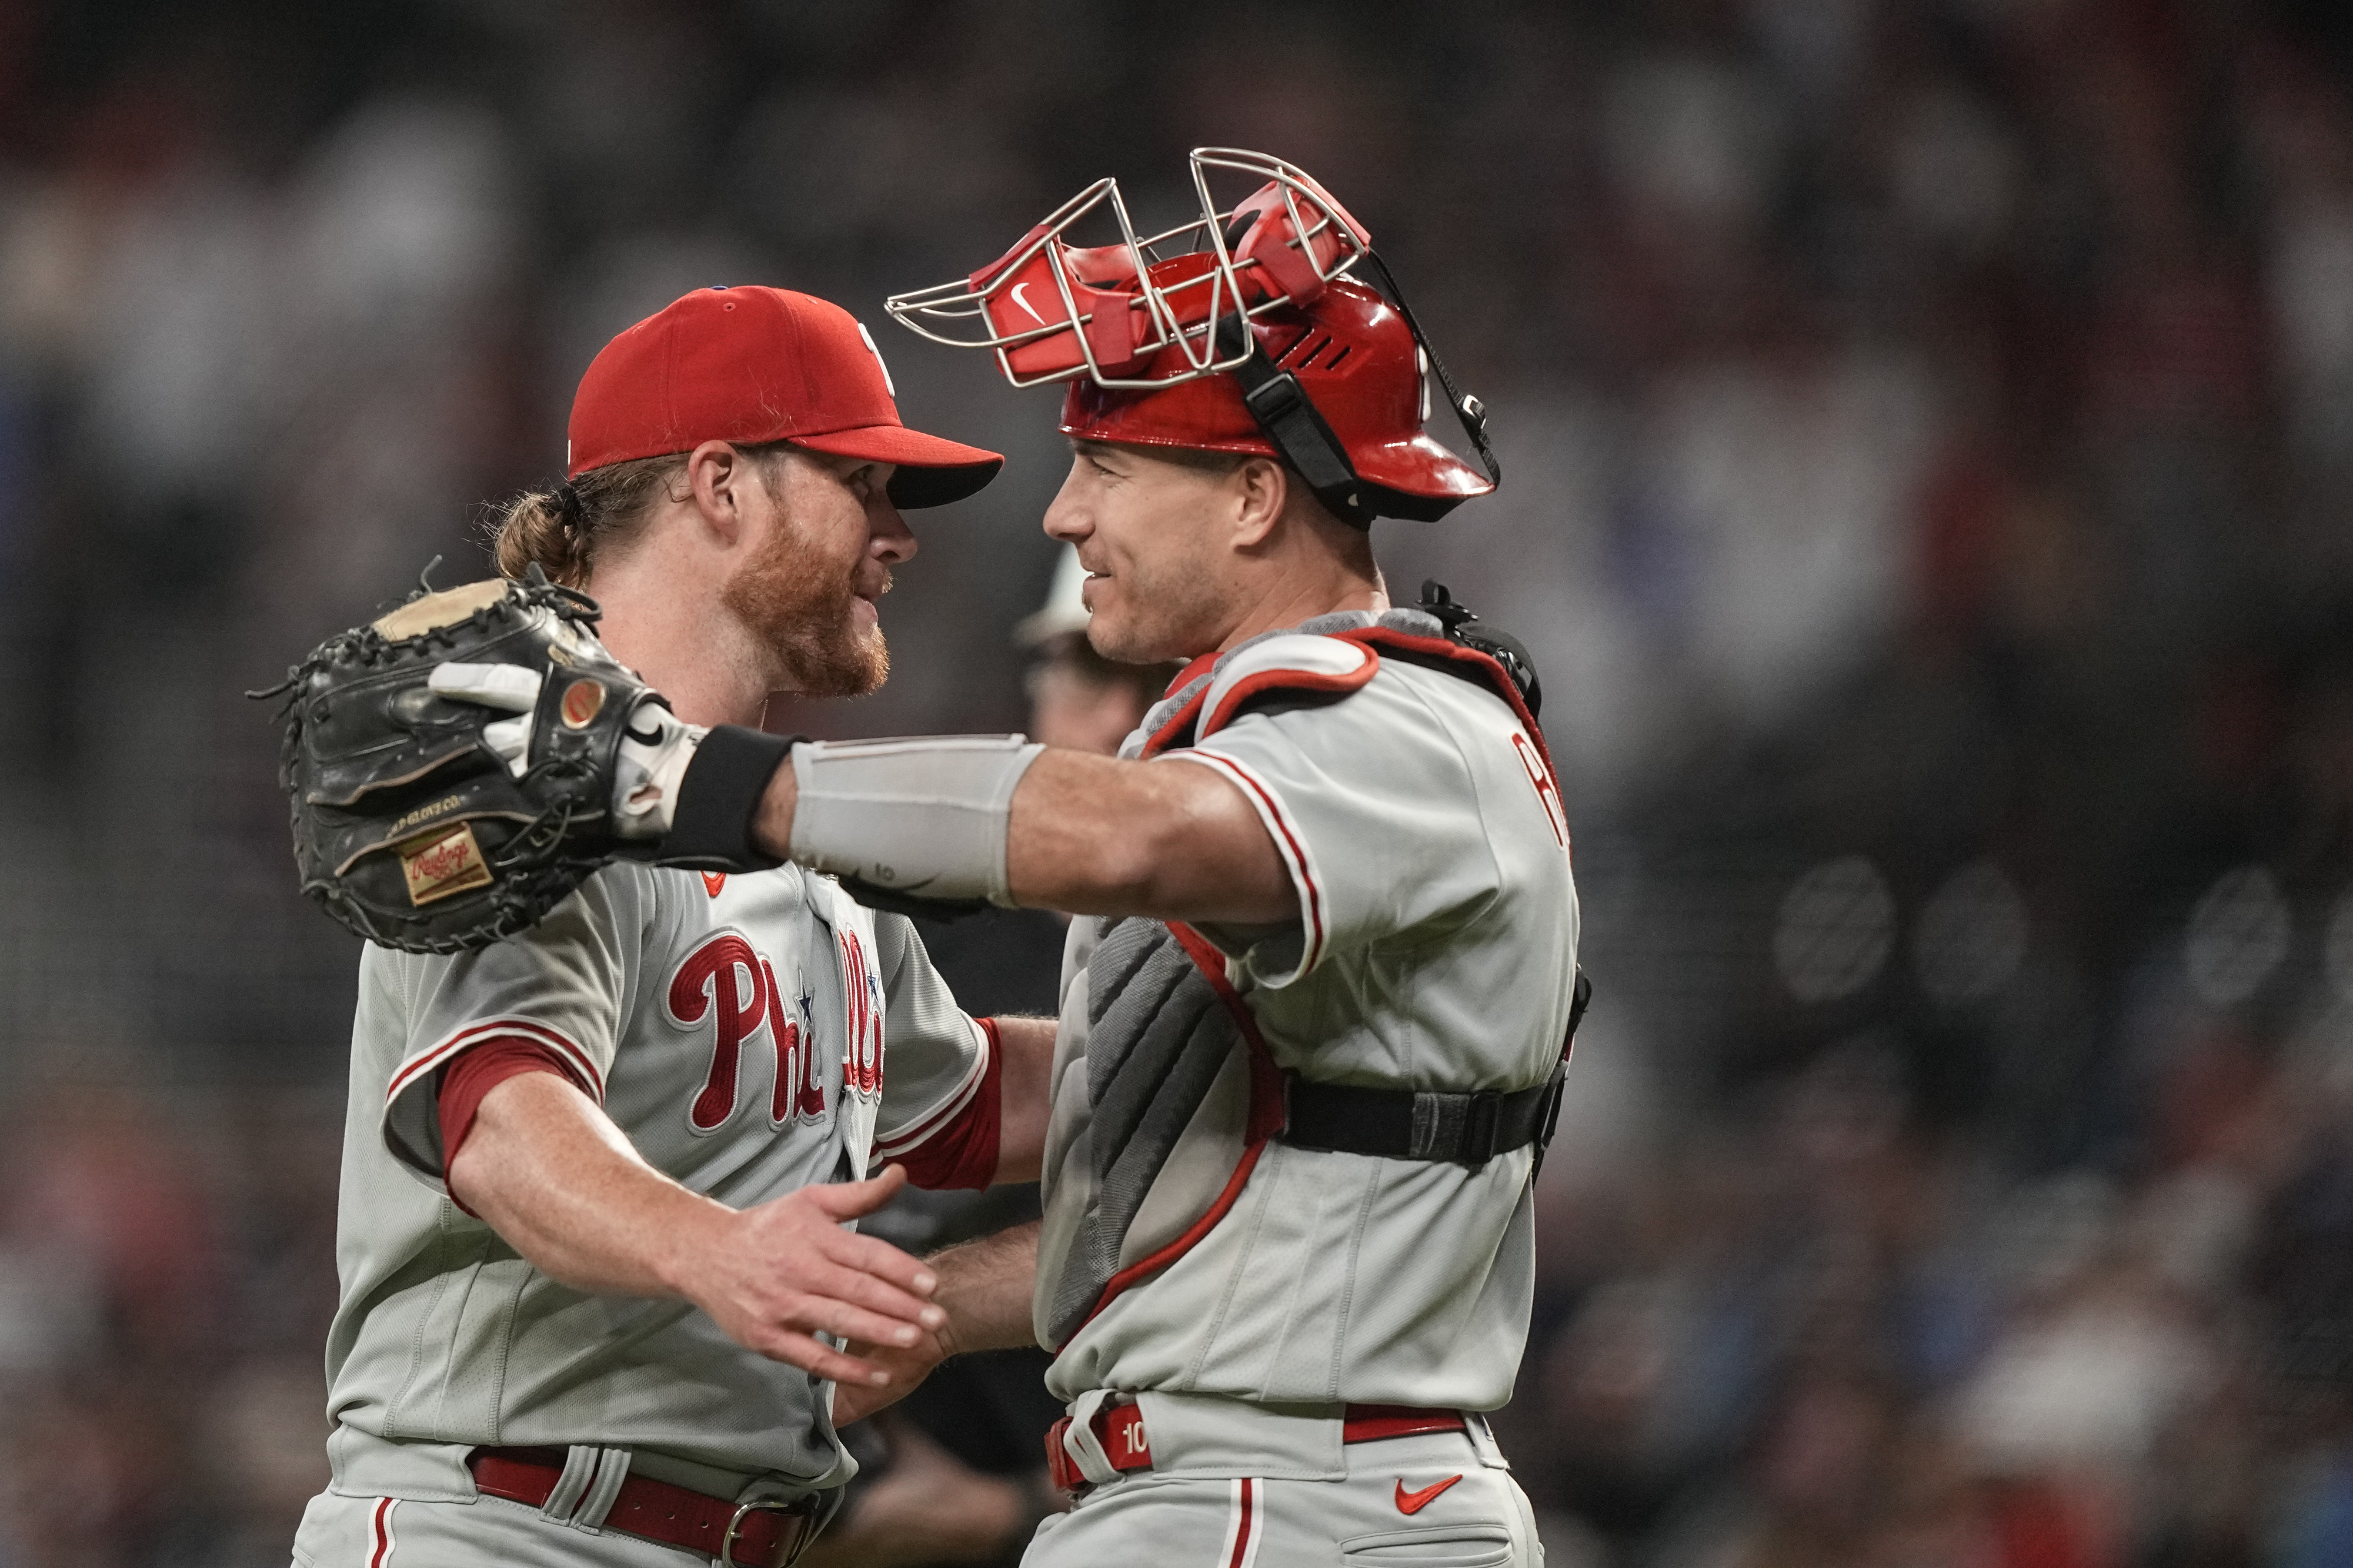 Kimbrel 8th pitcher in MLB history to earn 400 saves, Phillies beat Braves  6-4